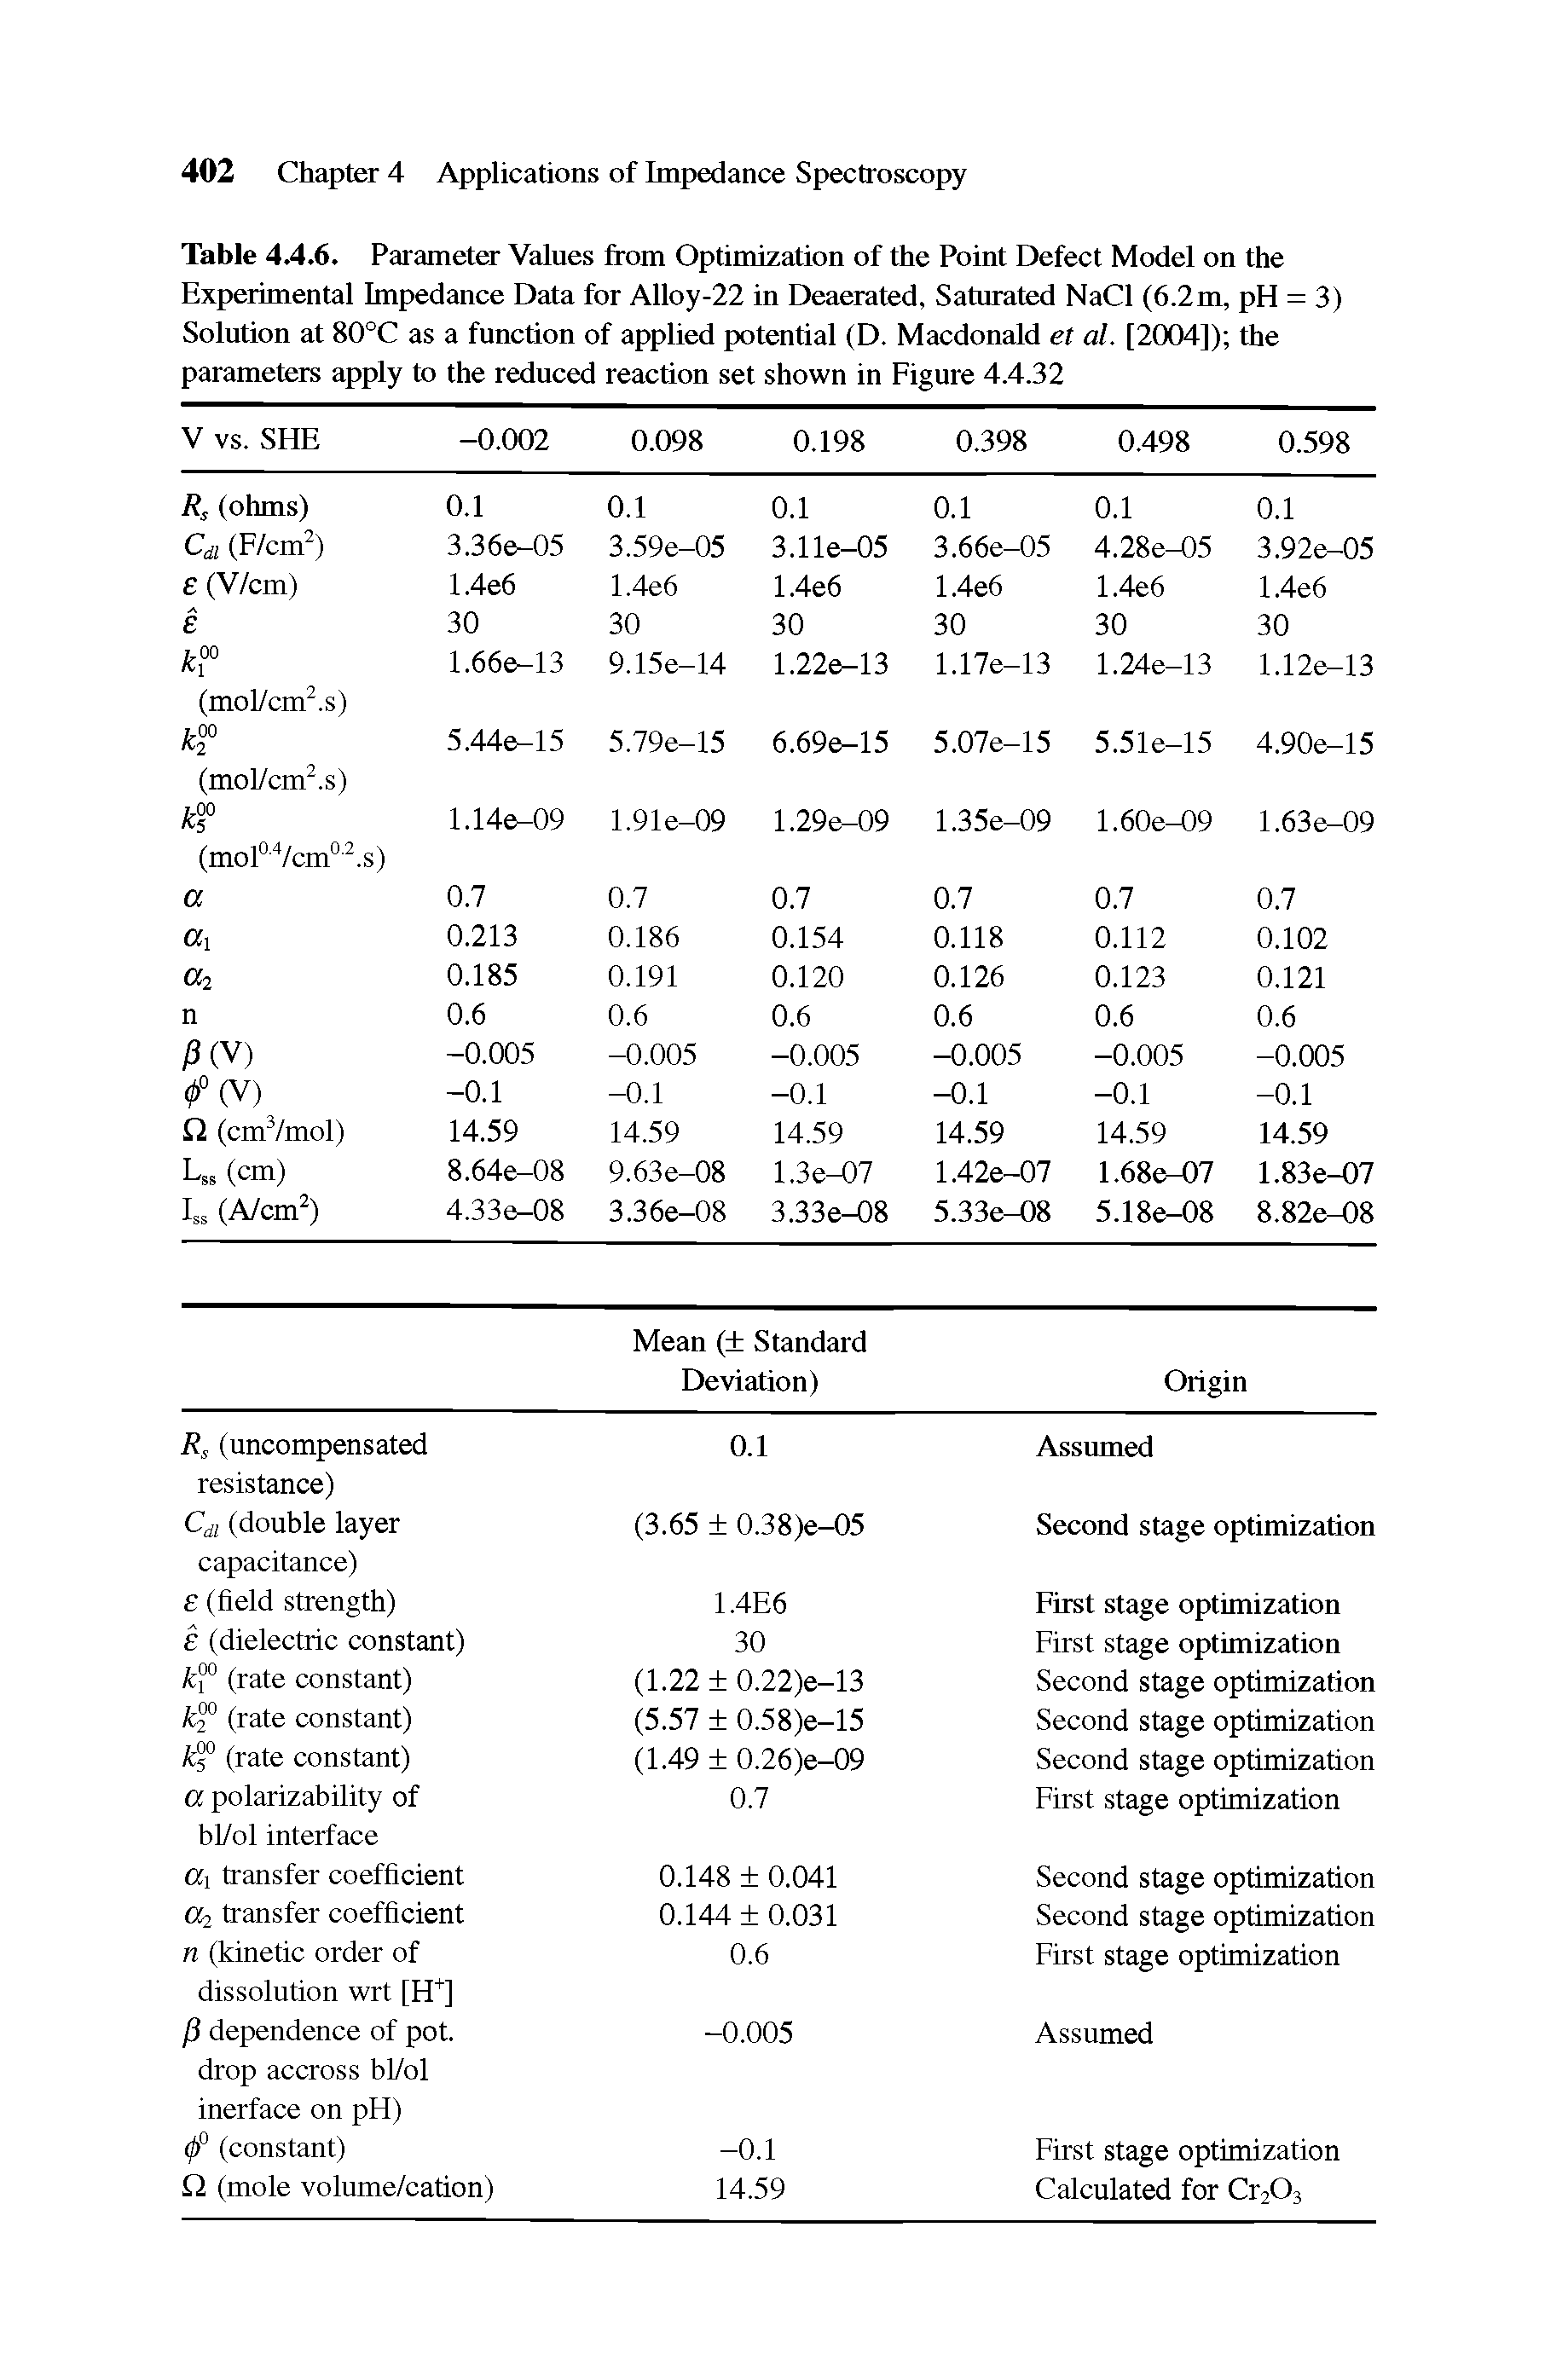 Table 4.4.6. Parameter Values from Optimization of the Point Defect Model on the Experimental Impedance Data for Alloy-22 in Deaerated, Saturated NaCl (6.2m, pH = 3) Solution at 80°C as a function of applied potential (D. Macdonald et al. [2004]) the parameters apply to the reduced reaction set shown in Figure 4.4.32...